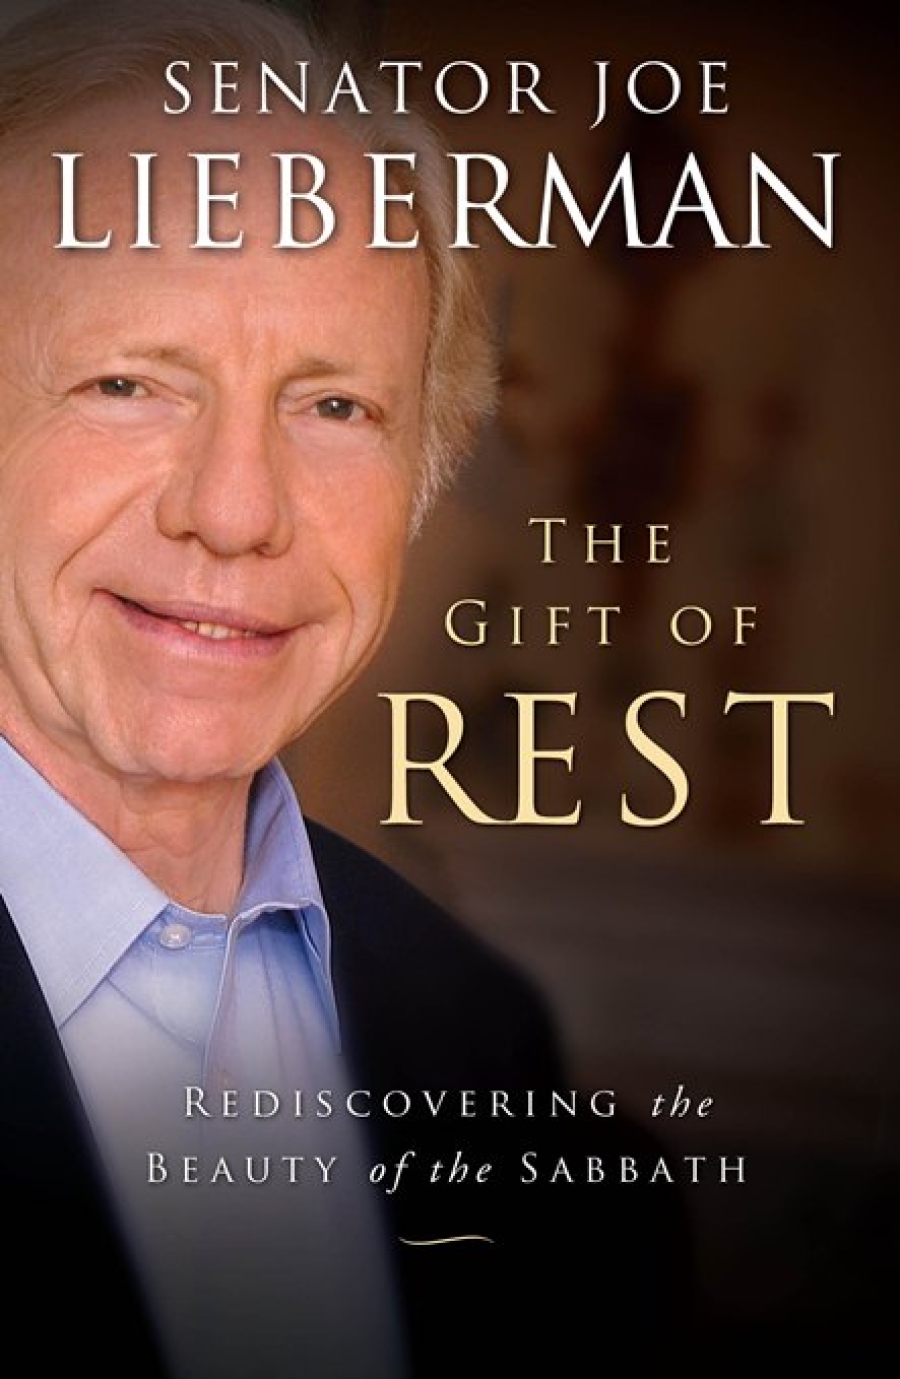 October 2017: The Gift of Rest